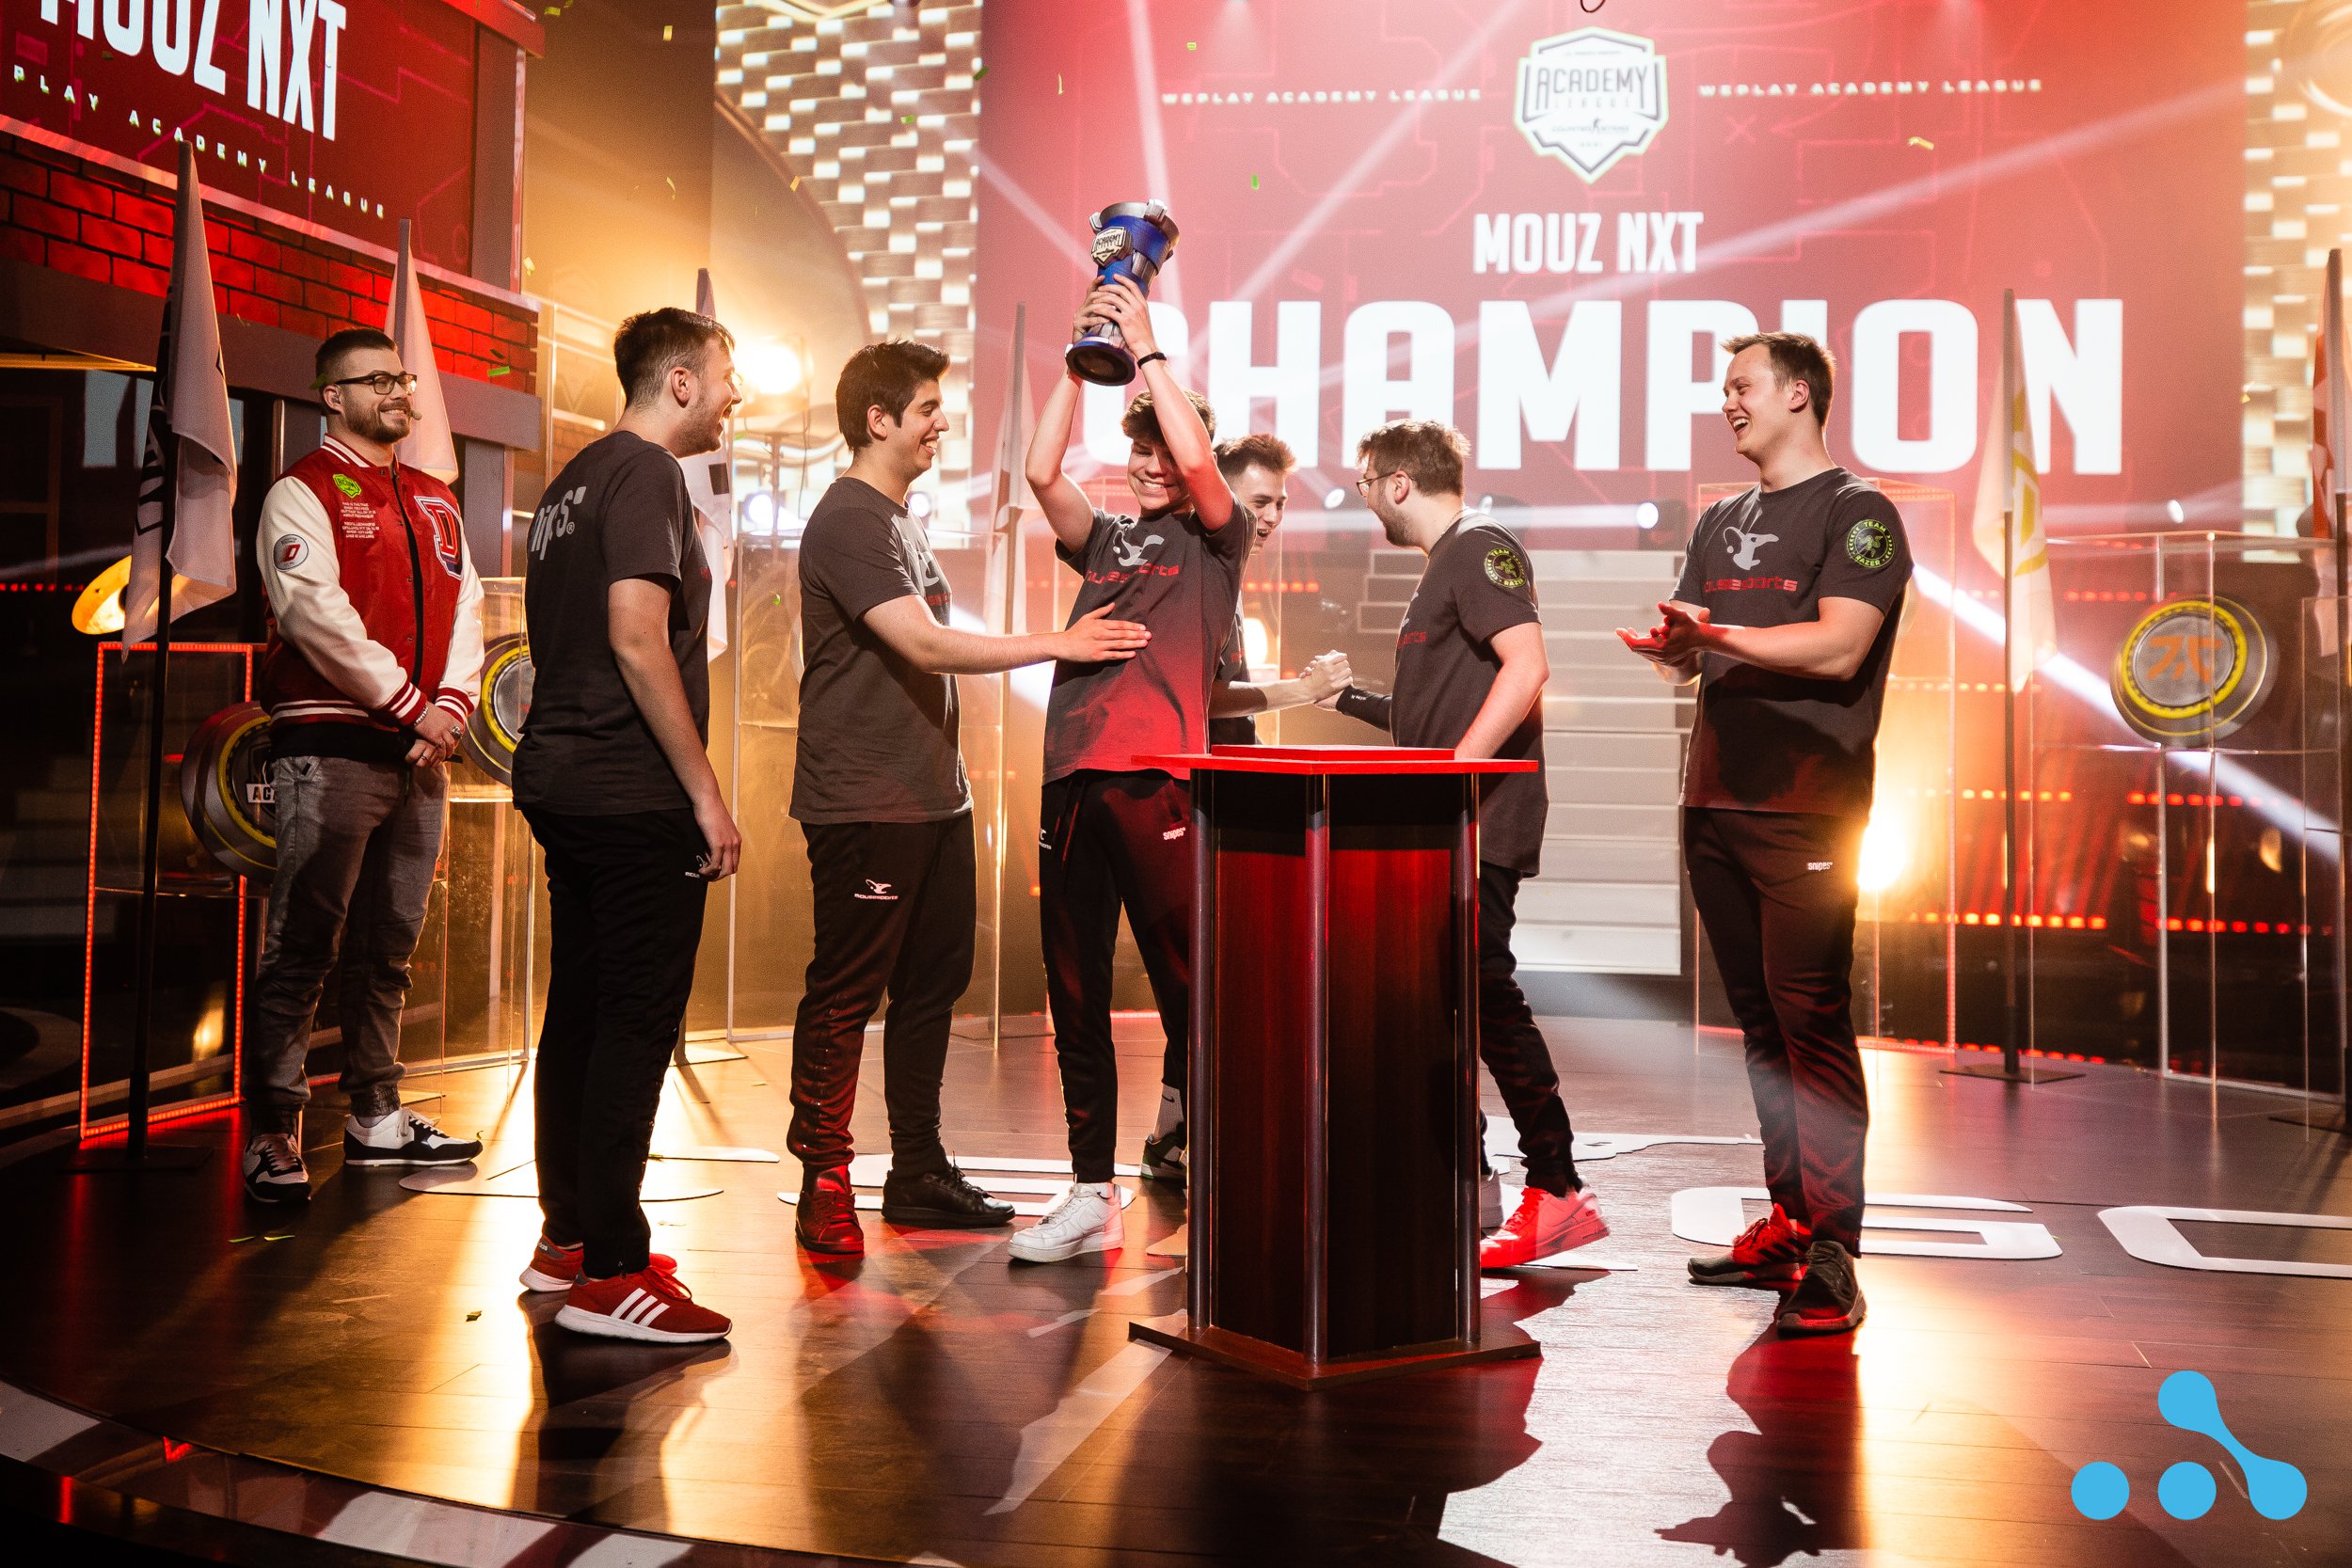 MOUZ NXT will defend their title once again